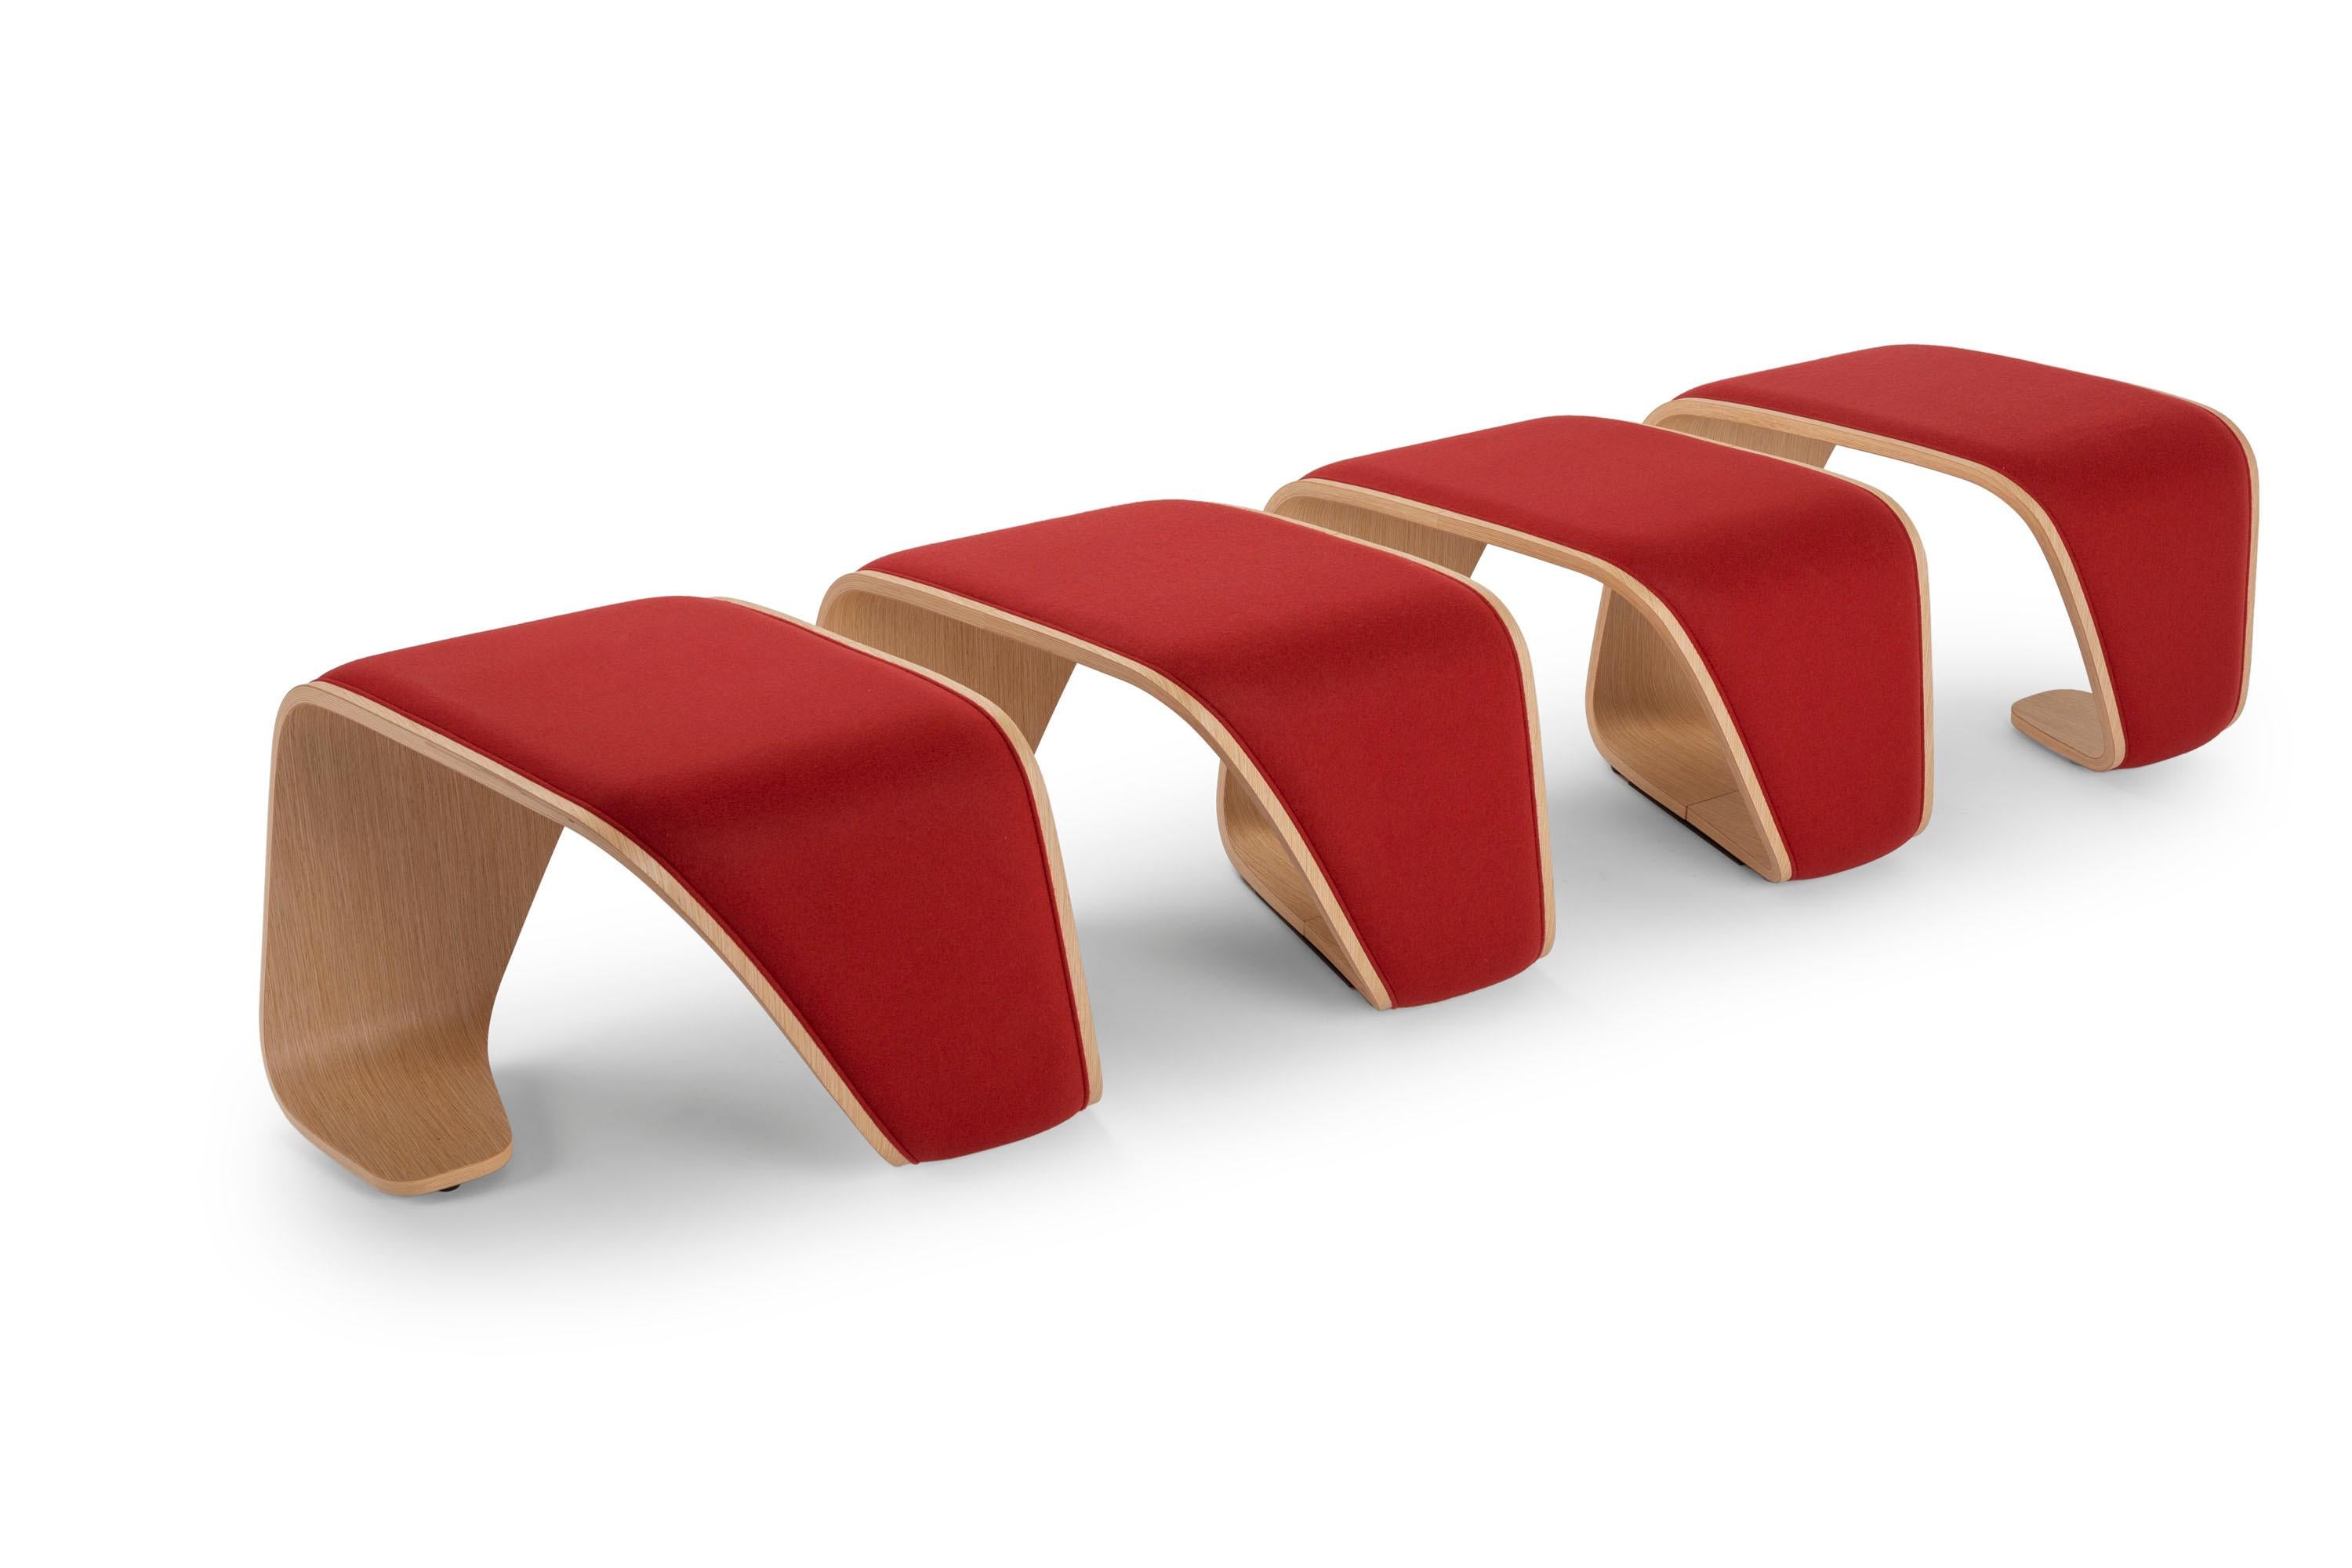 Inspired by the dynamic forms of biogenetics, the DNA modular bench consists of a single element of curved wood plywood, assembled specularly. 
The result is an appealing piece of furniture with a particular helix shape, each step of which